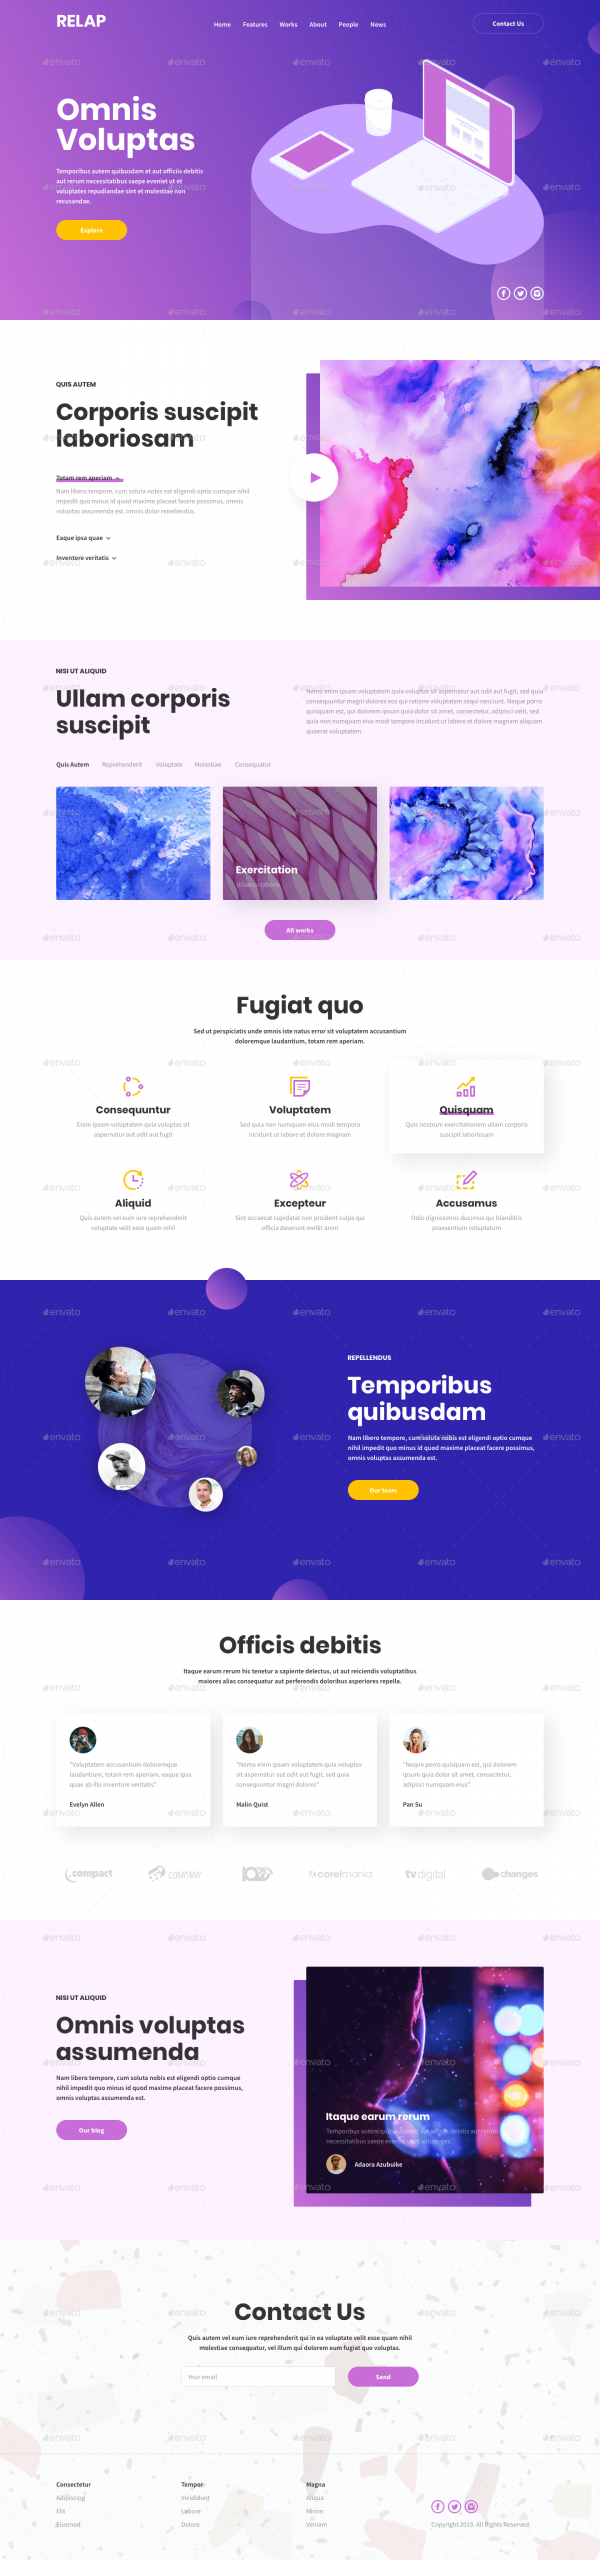 Download 15 Free PSD website templates 2015 | Free PSD Templates